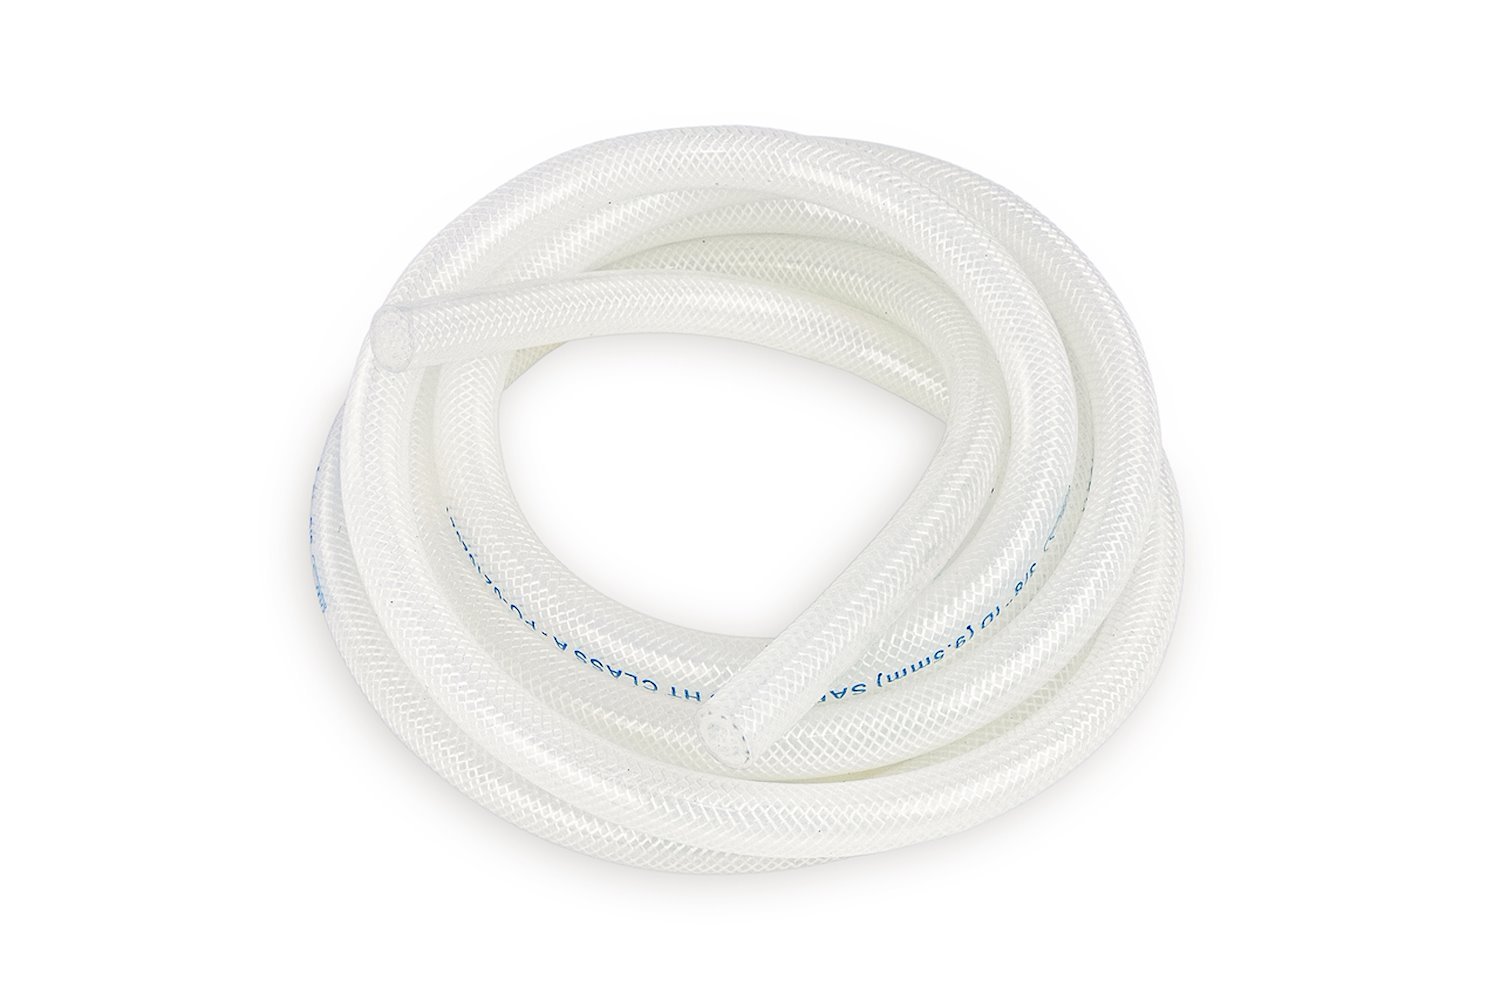 HTHH-013-CLEARx10 Silicone Heater Hose Tubing, High-Temp Reinforced, 1/8 in. ID, 10 ft. Roll, Clear